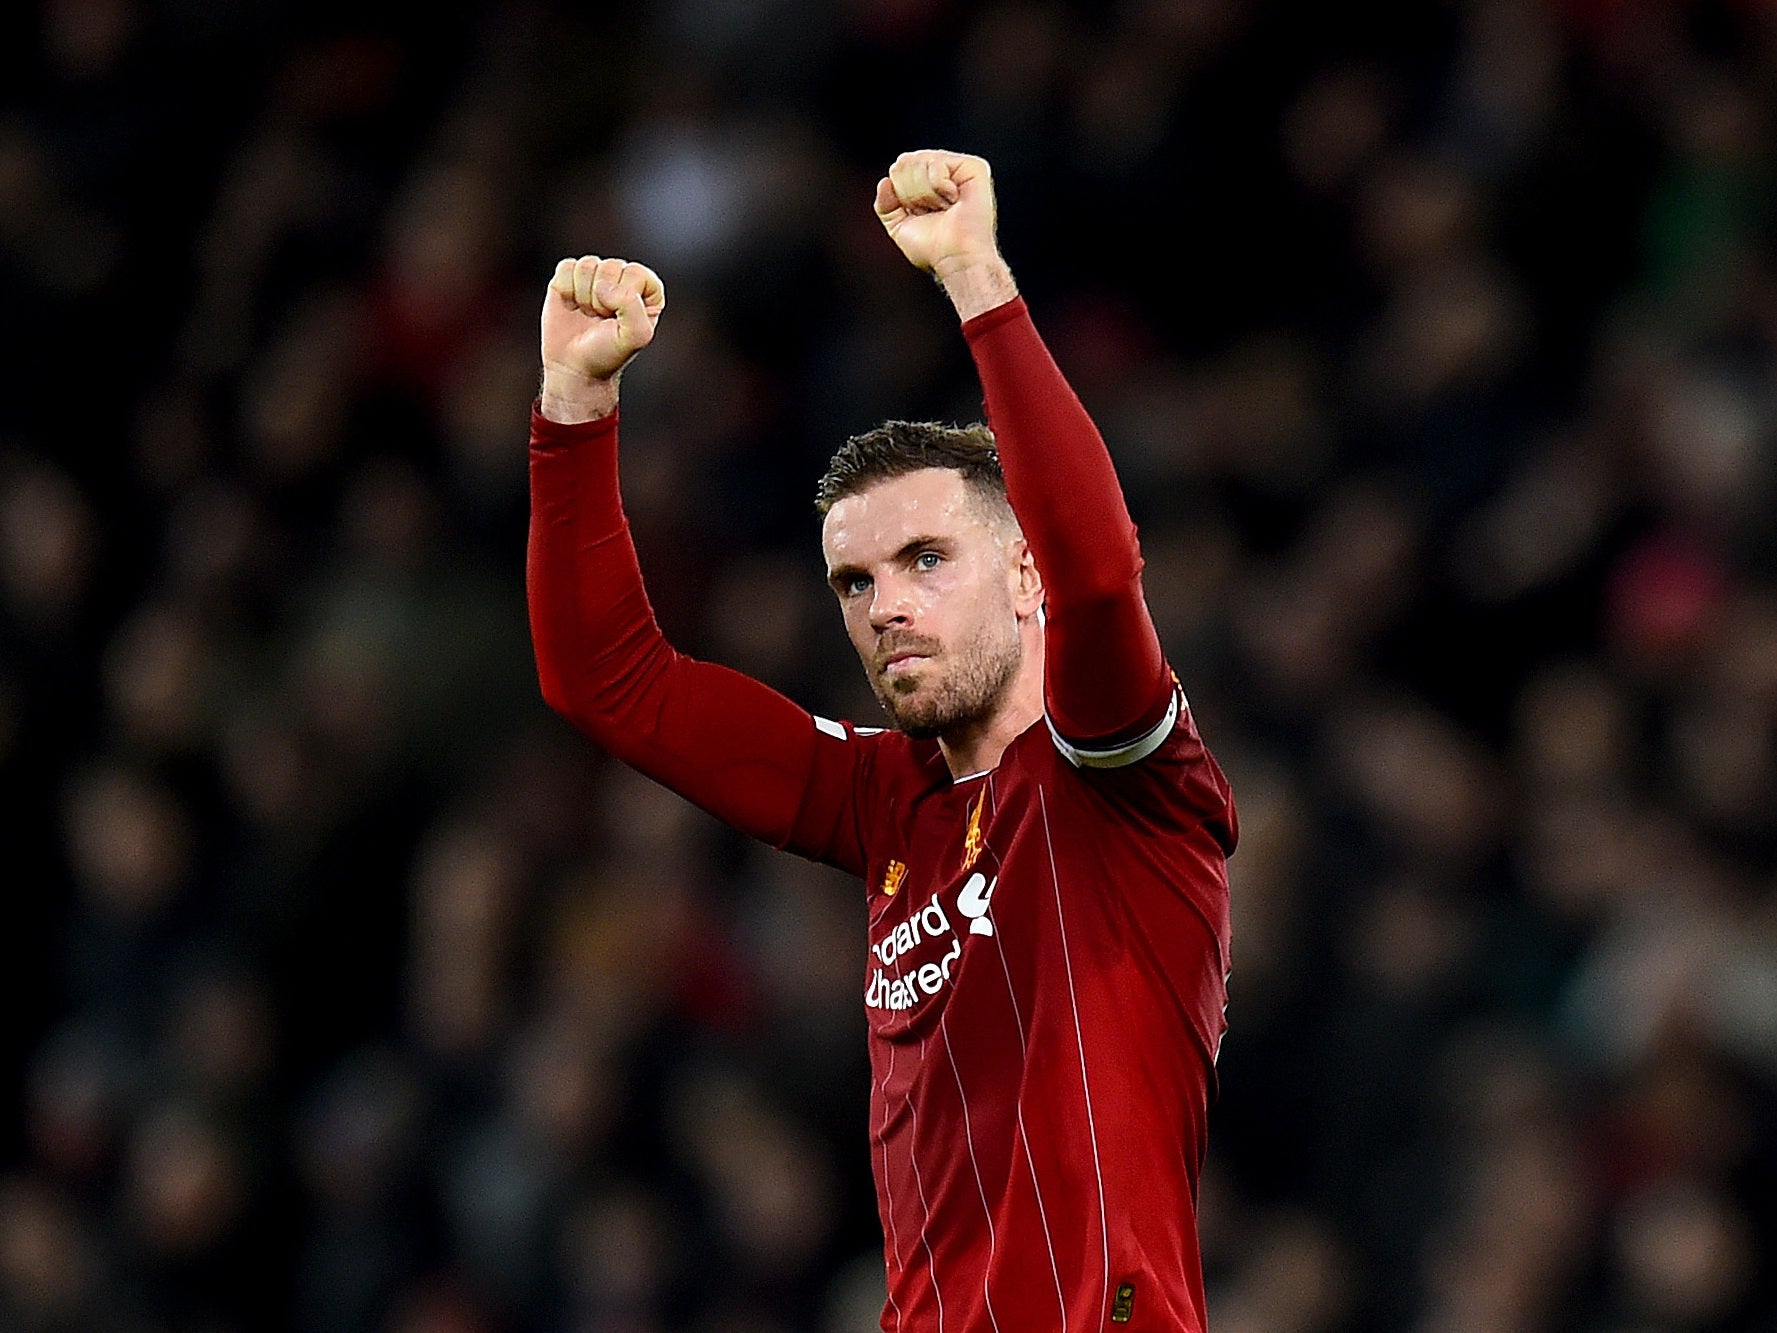 Henderson has led by example at Anfield